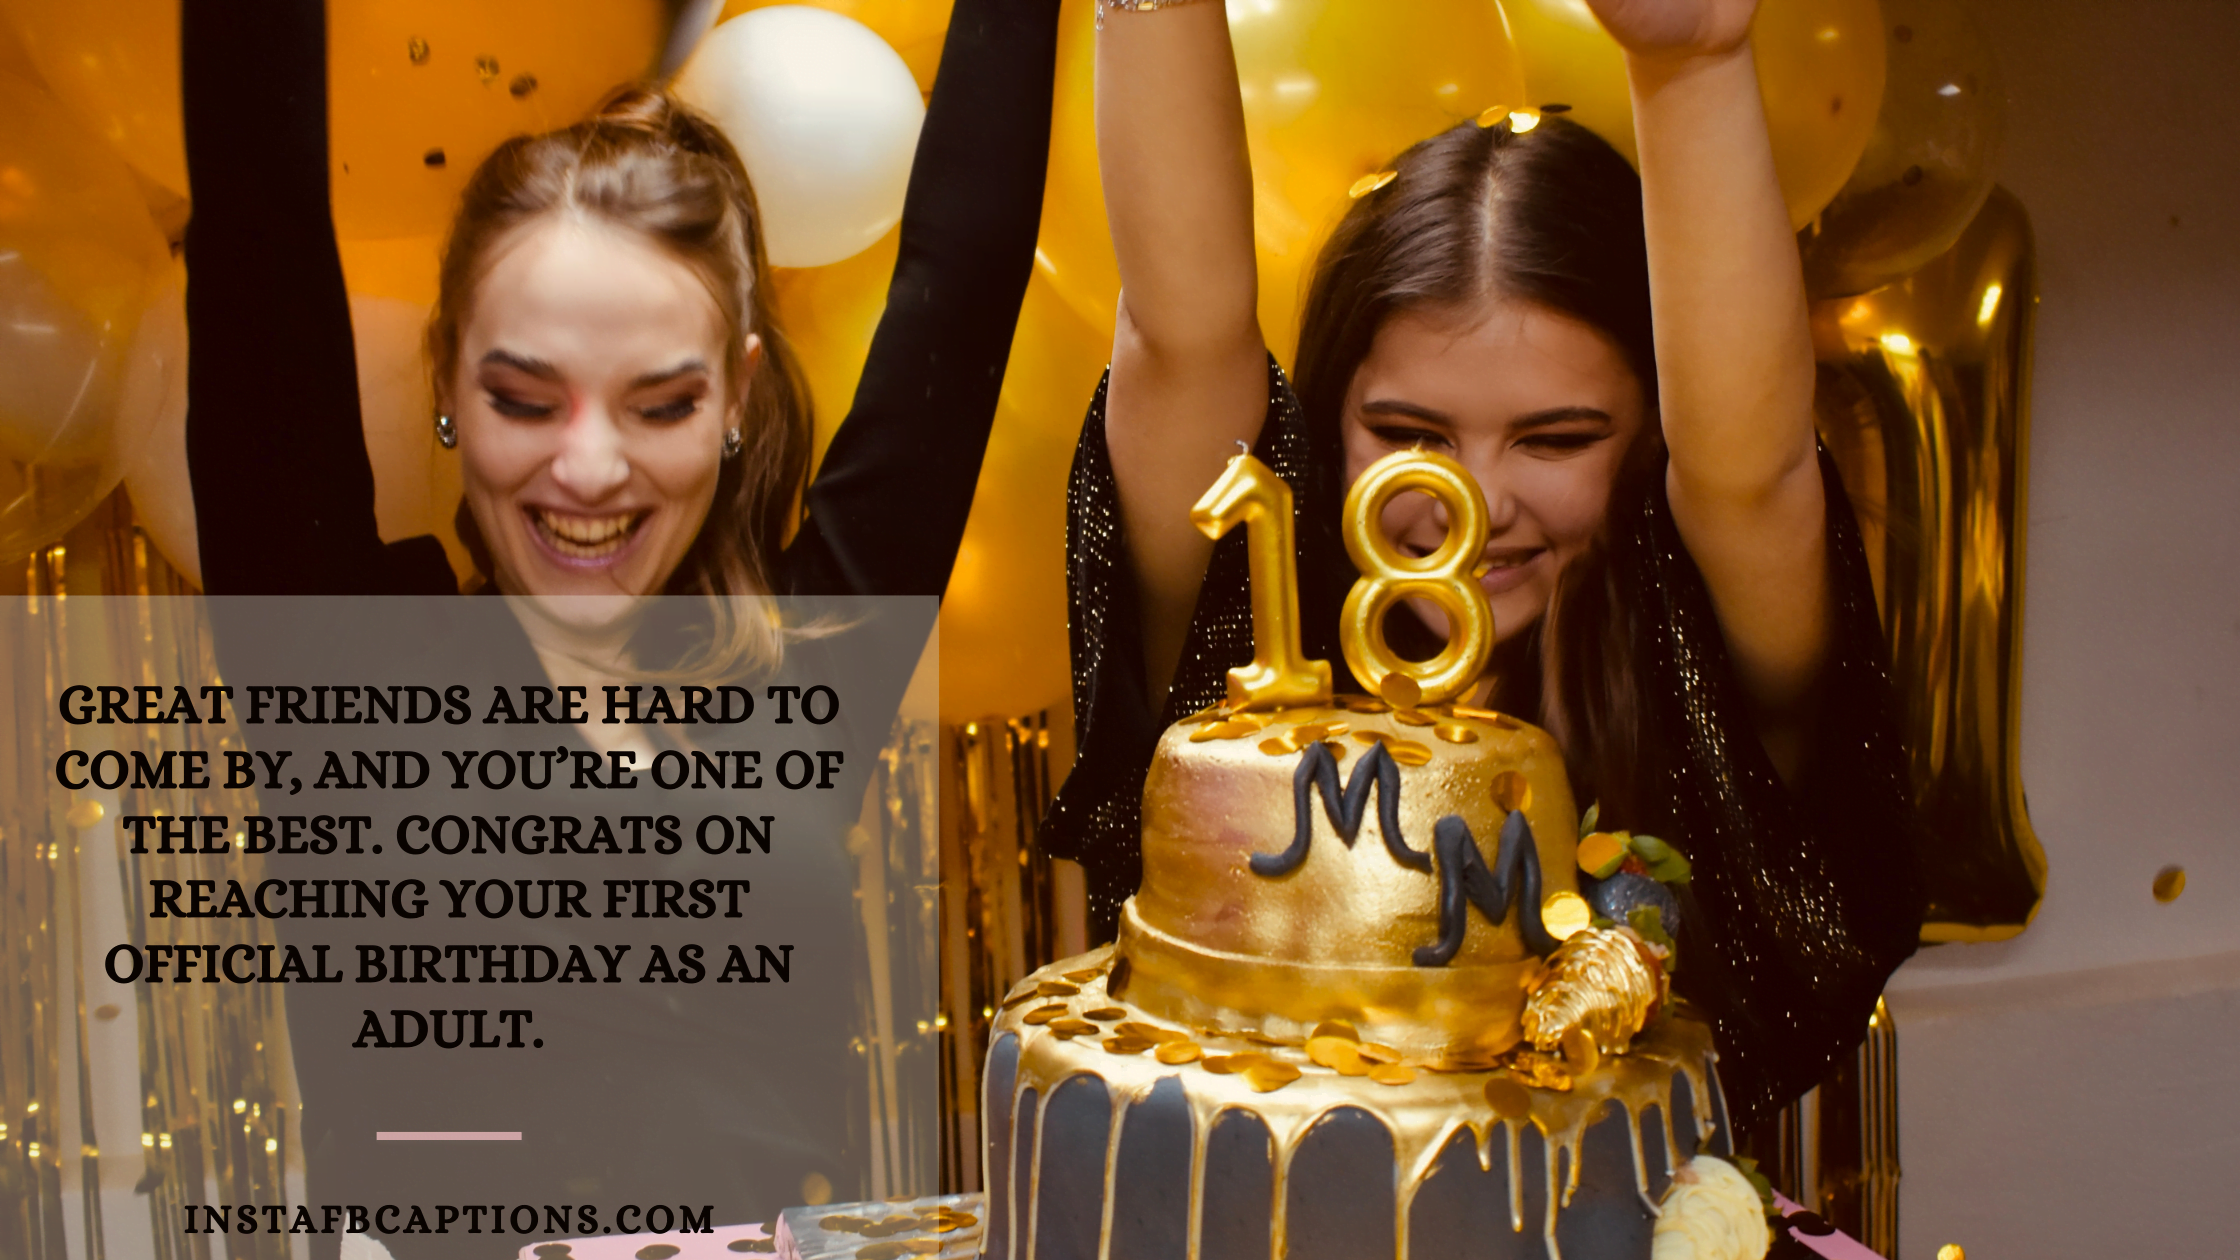 Great friends are hard to come by, and you’re one of the best. Congrats on reaching your first official birthday as an adult.  - 18th birthday wishes for best friend  - Oh, Sweet 18: Instagram Captions to Celebrate Growing Up